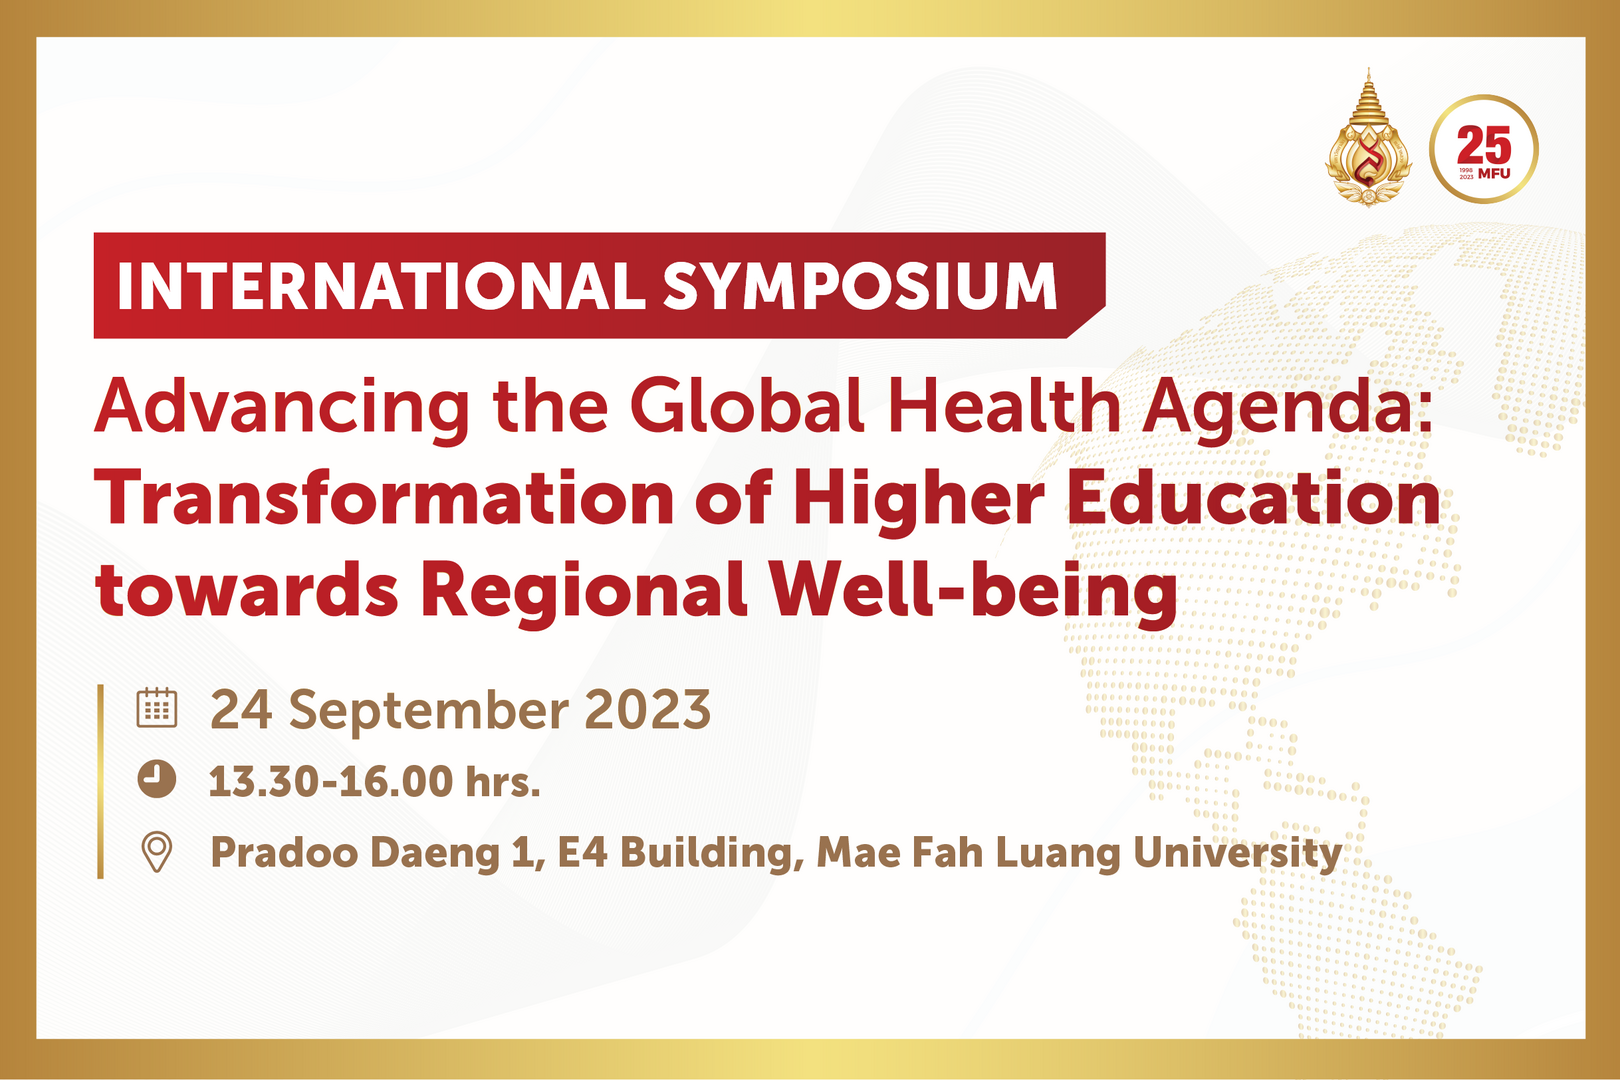 Call for Participations: International Symposium on “Advancing the Global Health Agenda: Transformation of Higher Education towards Regional Well-being”.